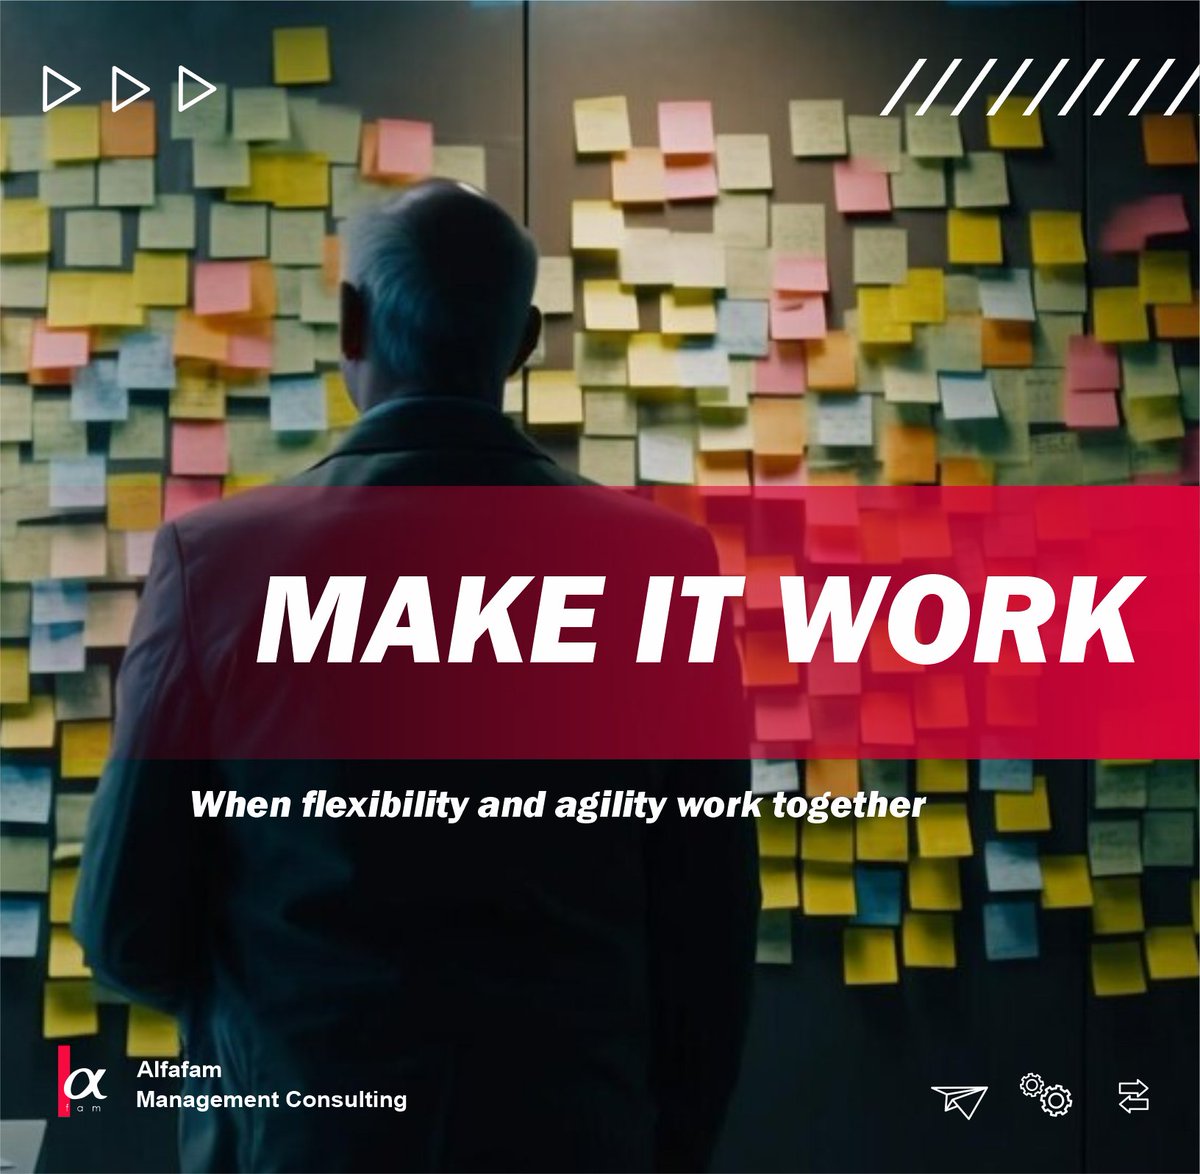 Being Agile and Adaptive involves embracing an agile project management approach and being open to adjusting the project methodology to better suit the situation. Flexibility allows for more effective problem-solving.
#projectmanagement #AgileManagement